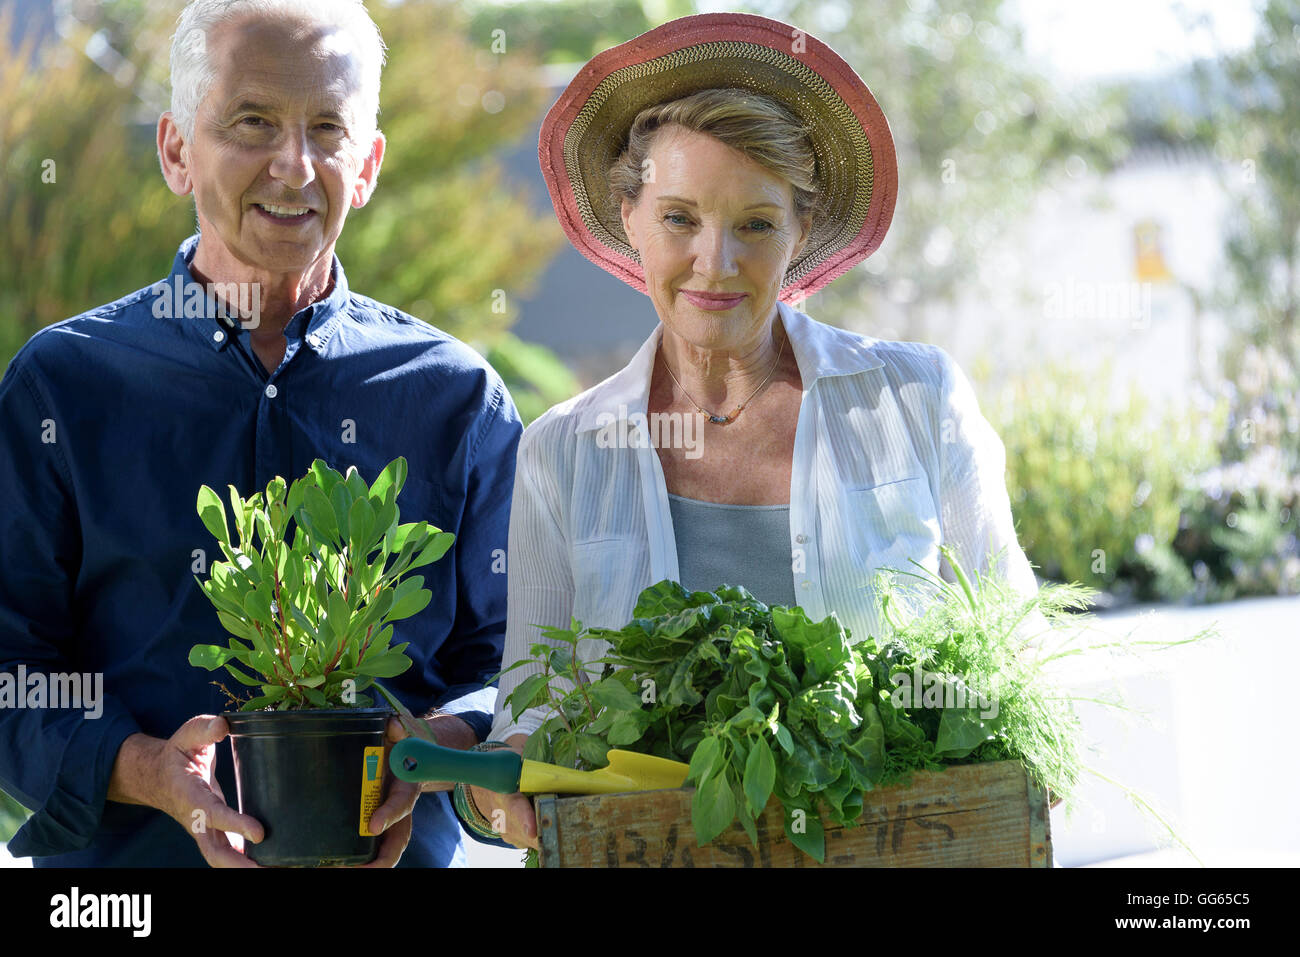 Portrait of a happy senior couple carrying crate of leaf vegetable Stock Photo